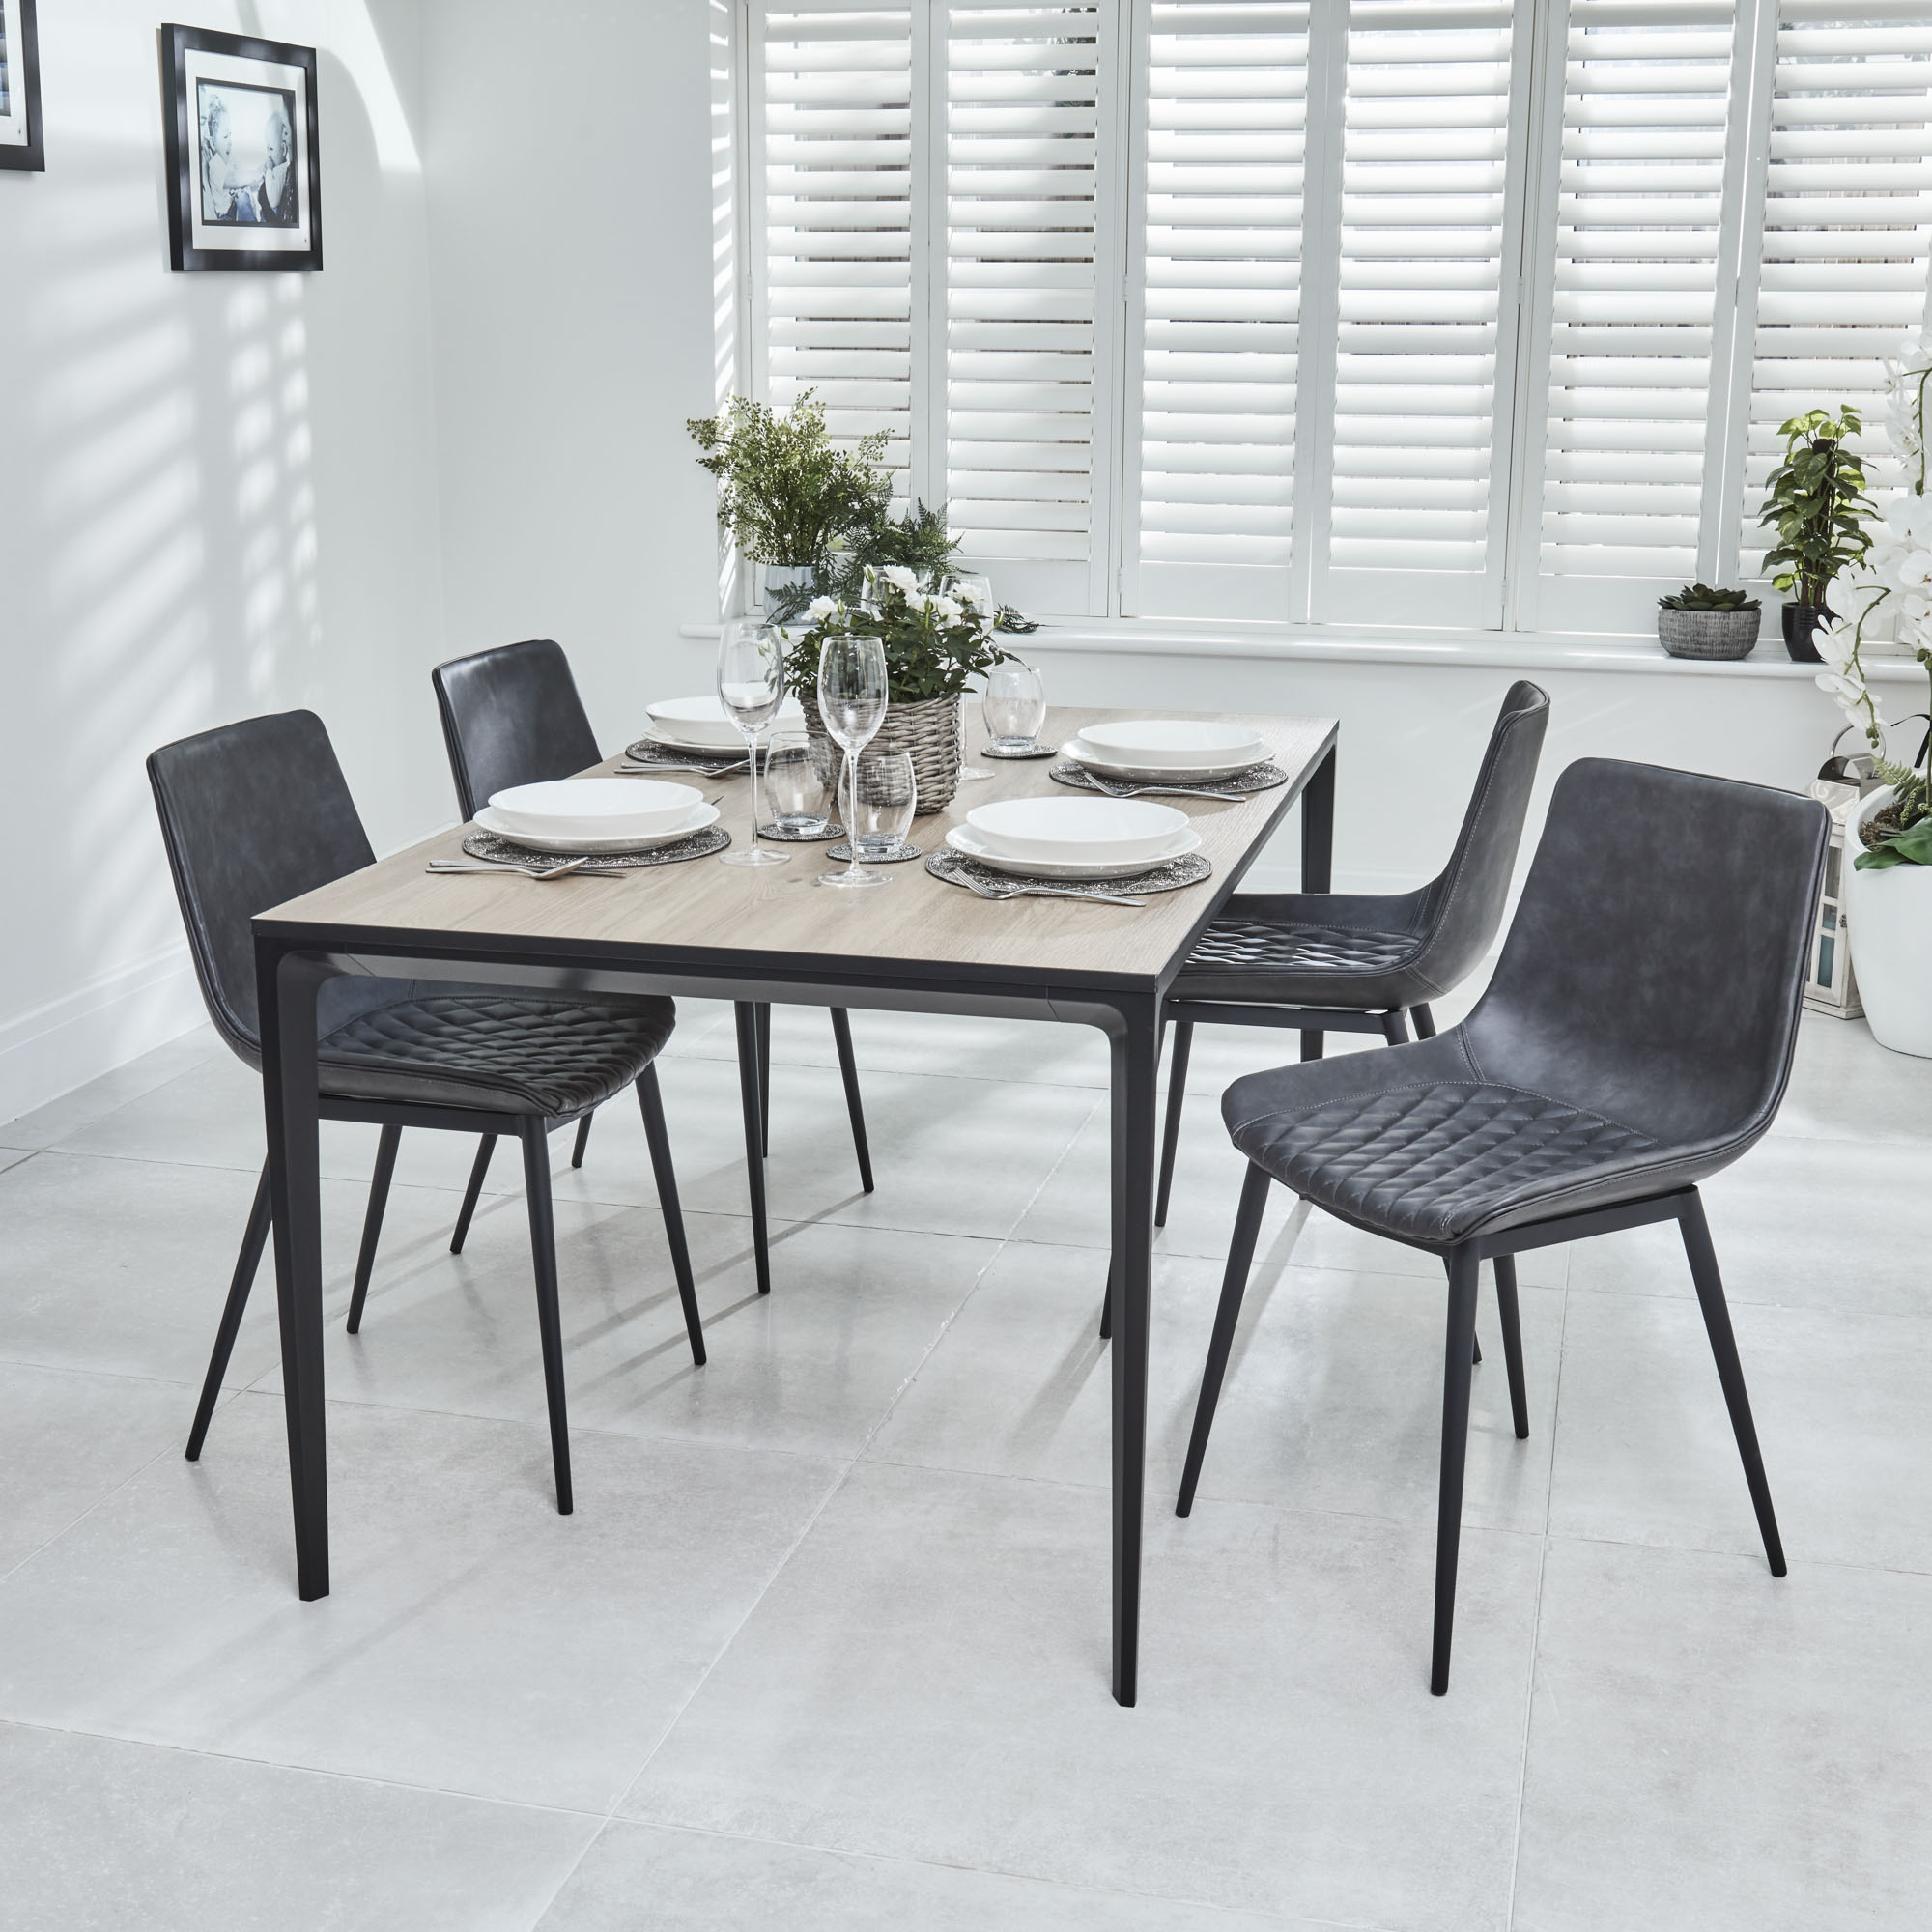 Bellagio 1.6M Natural Oak Melamine Dining Table with 4x Leo Grey Dining Chairs